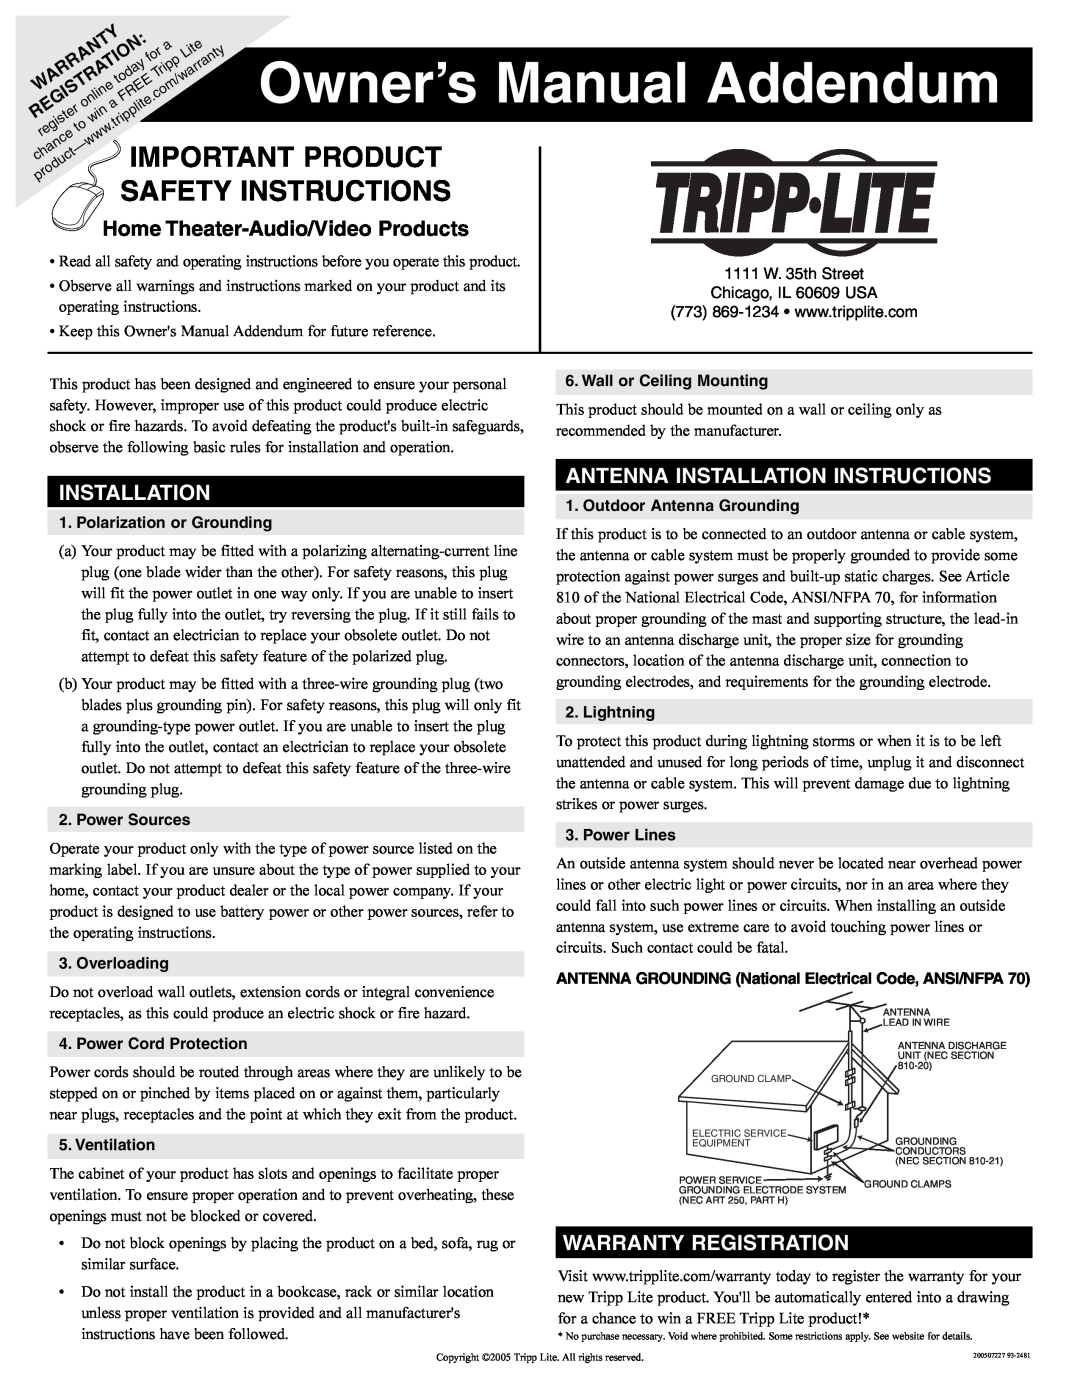 Tripp Lite Home Theater-Audio/Video Products owner manual Important Product, Safety Instructions, Installation, Lightning 